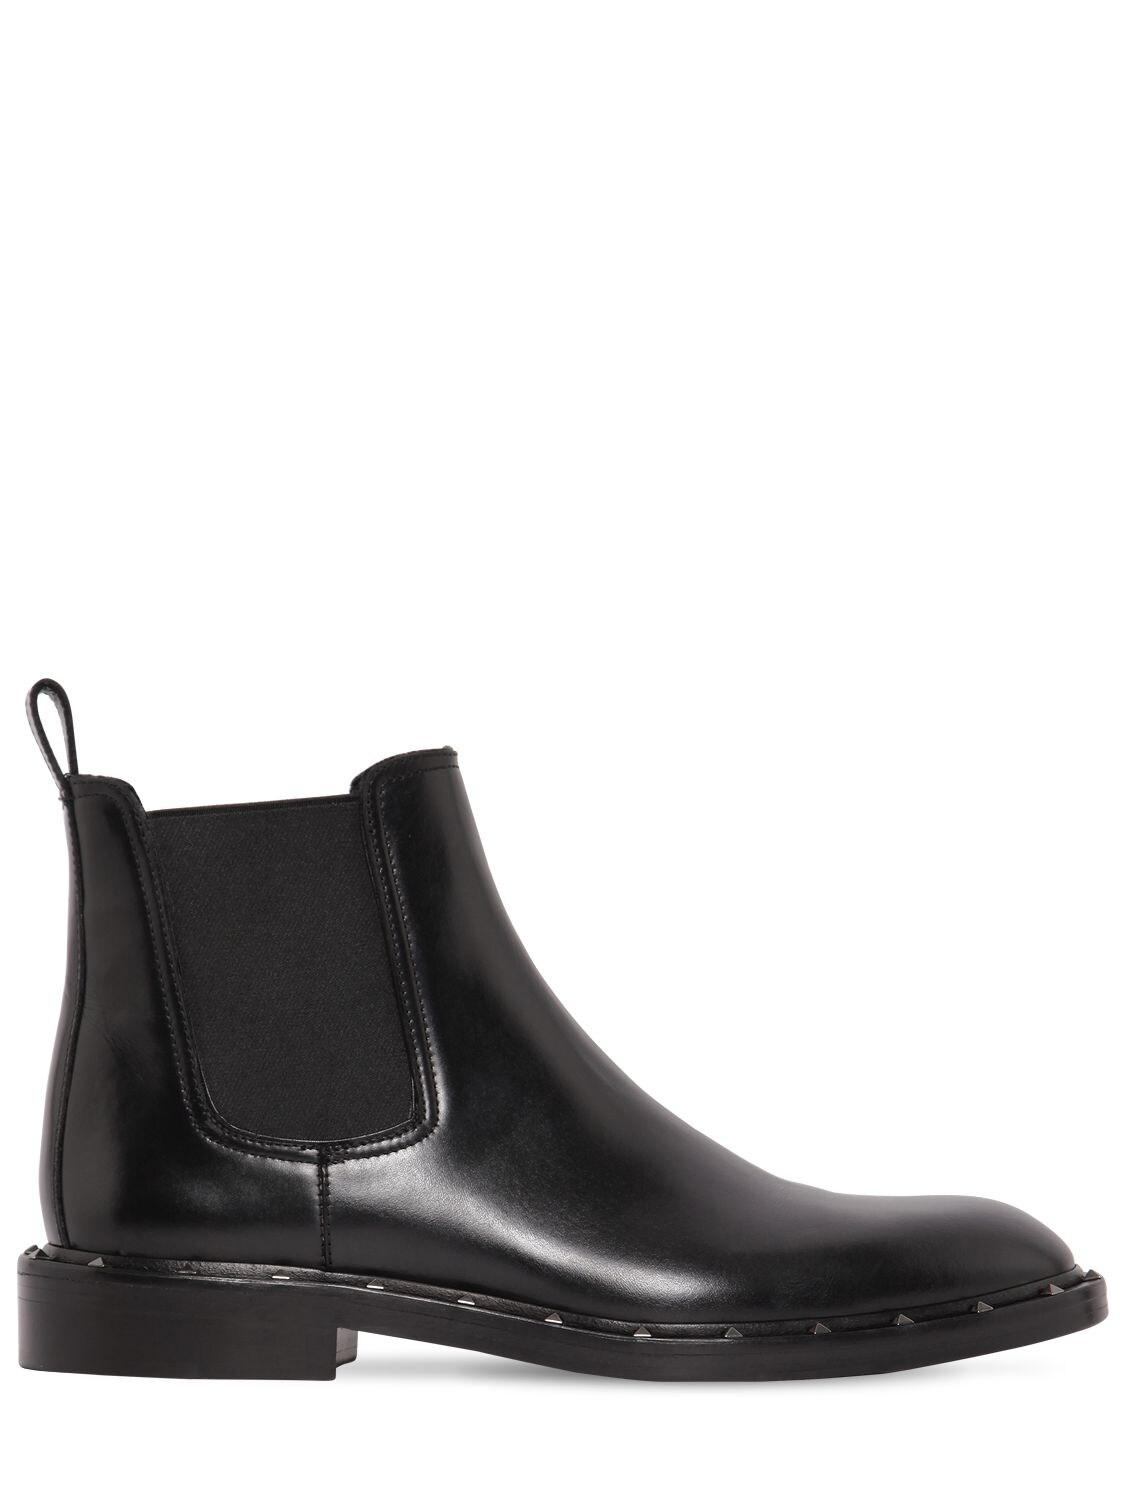 Valentino Sleek Studded Boots in Black for Men - Lyst